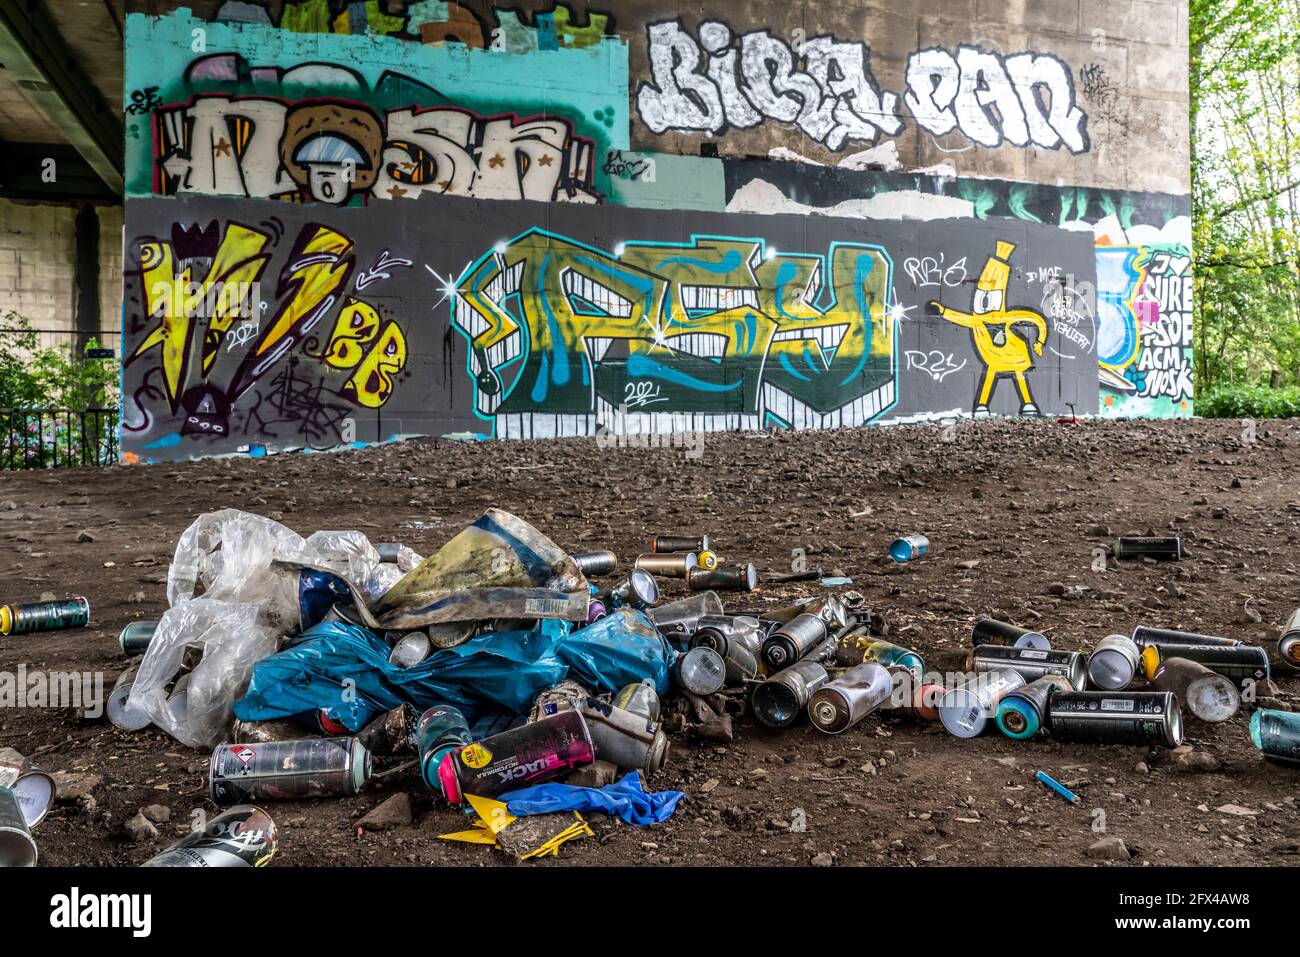 Paint cans, leftover rubbish from graffiti sprayers, under the motorway bridge, of the A43 over the Rhein-Herne canal, Recklinghausen, NRW, Germany Stock Photo